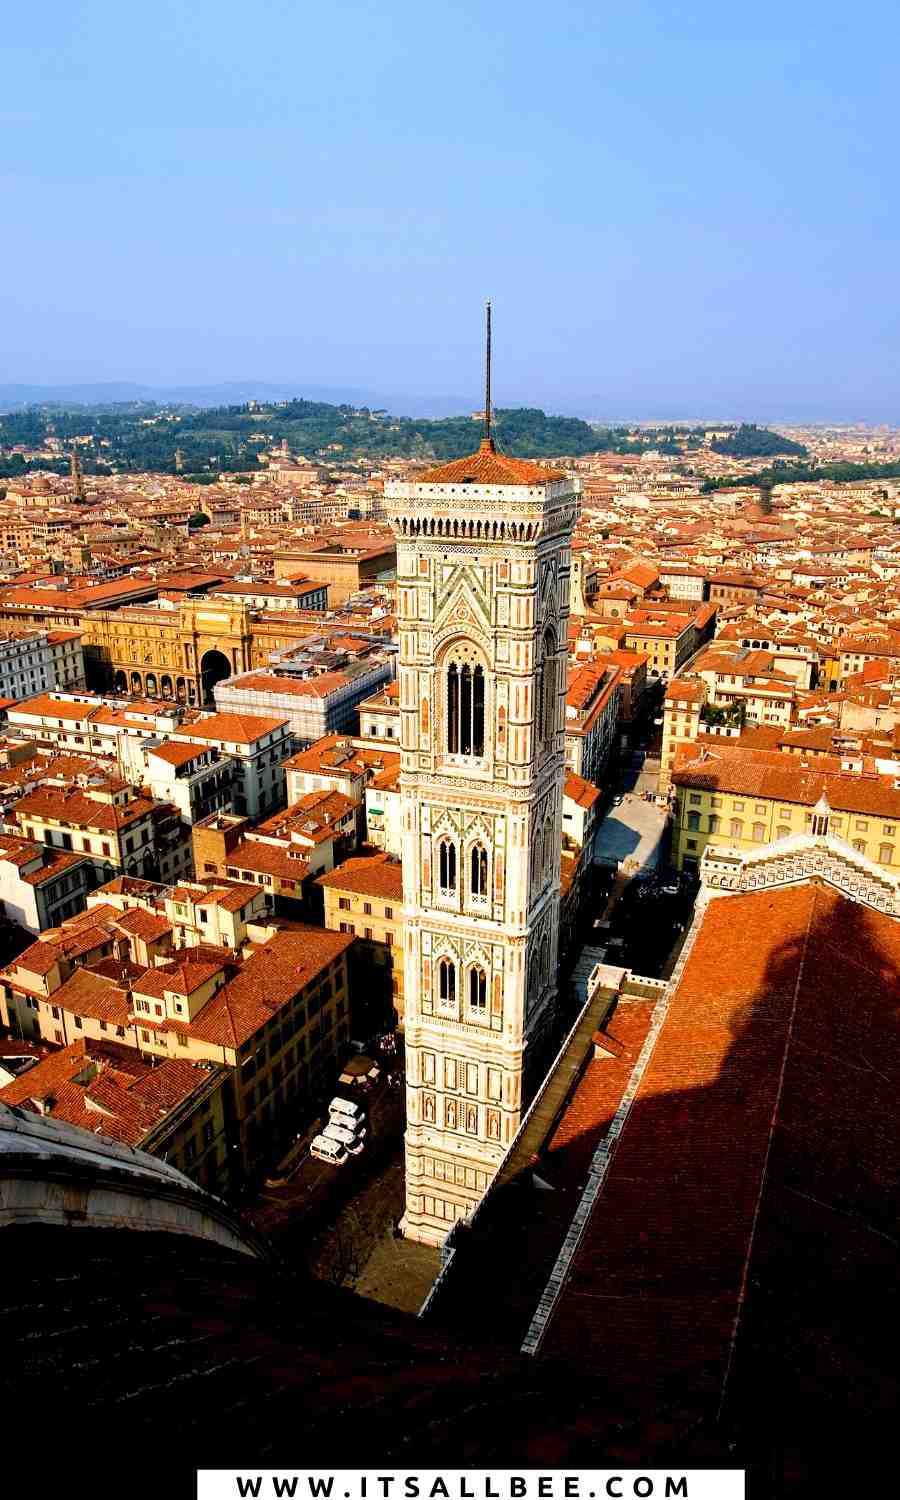 Top Books And Novels Set In Florence | ItsAllBee Travel Blog